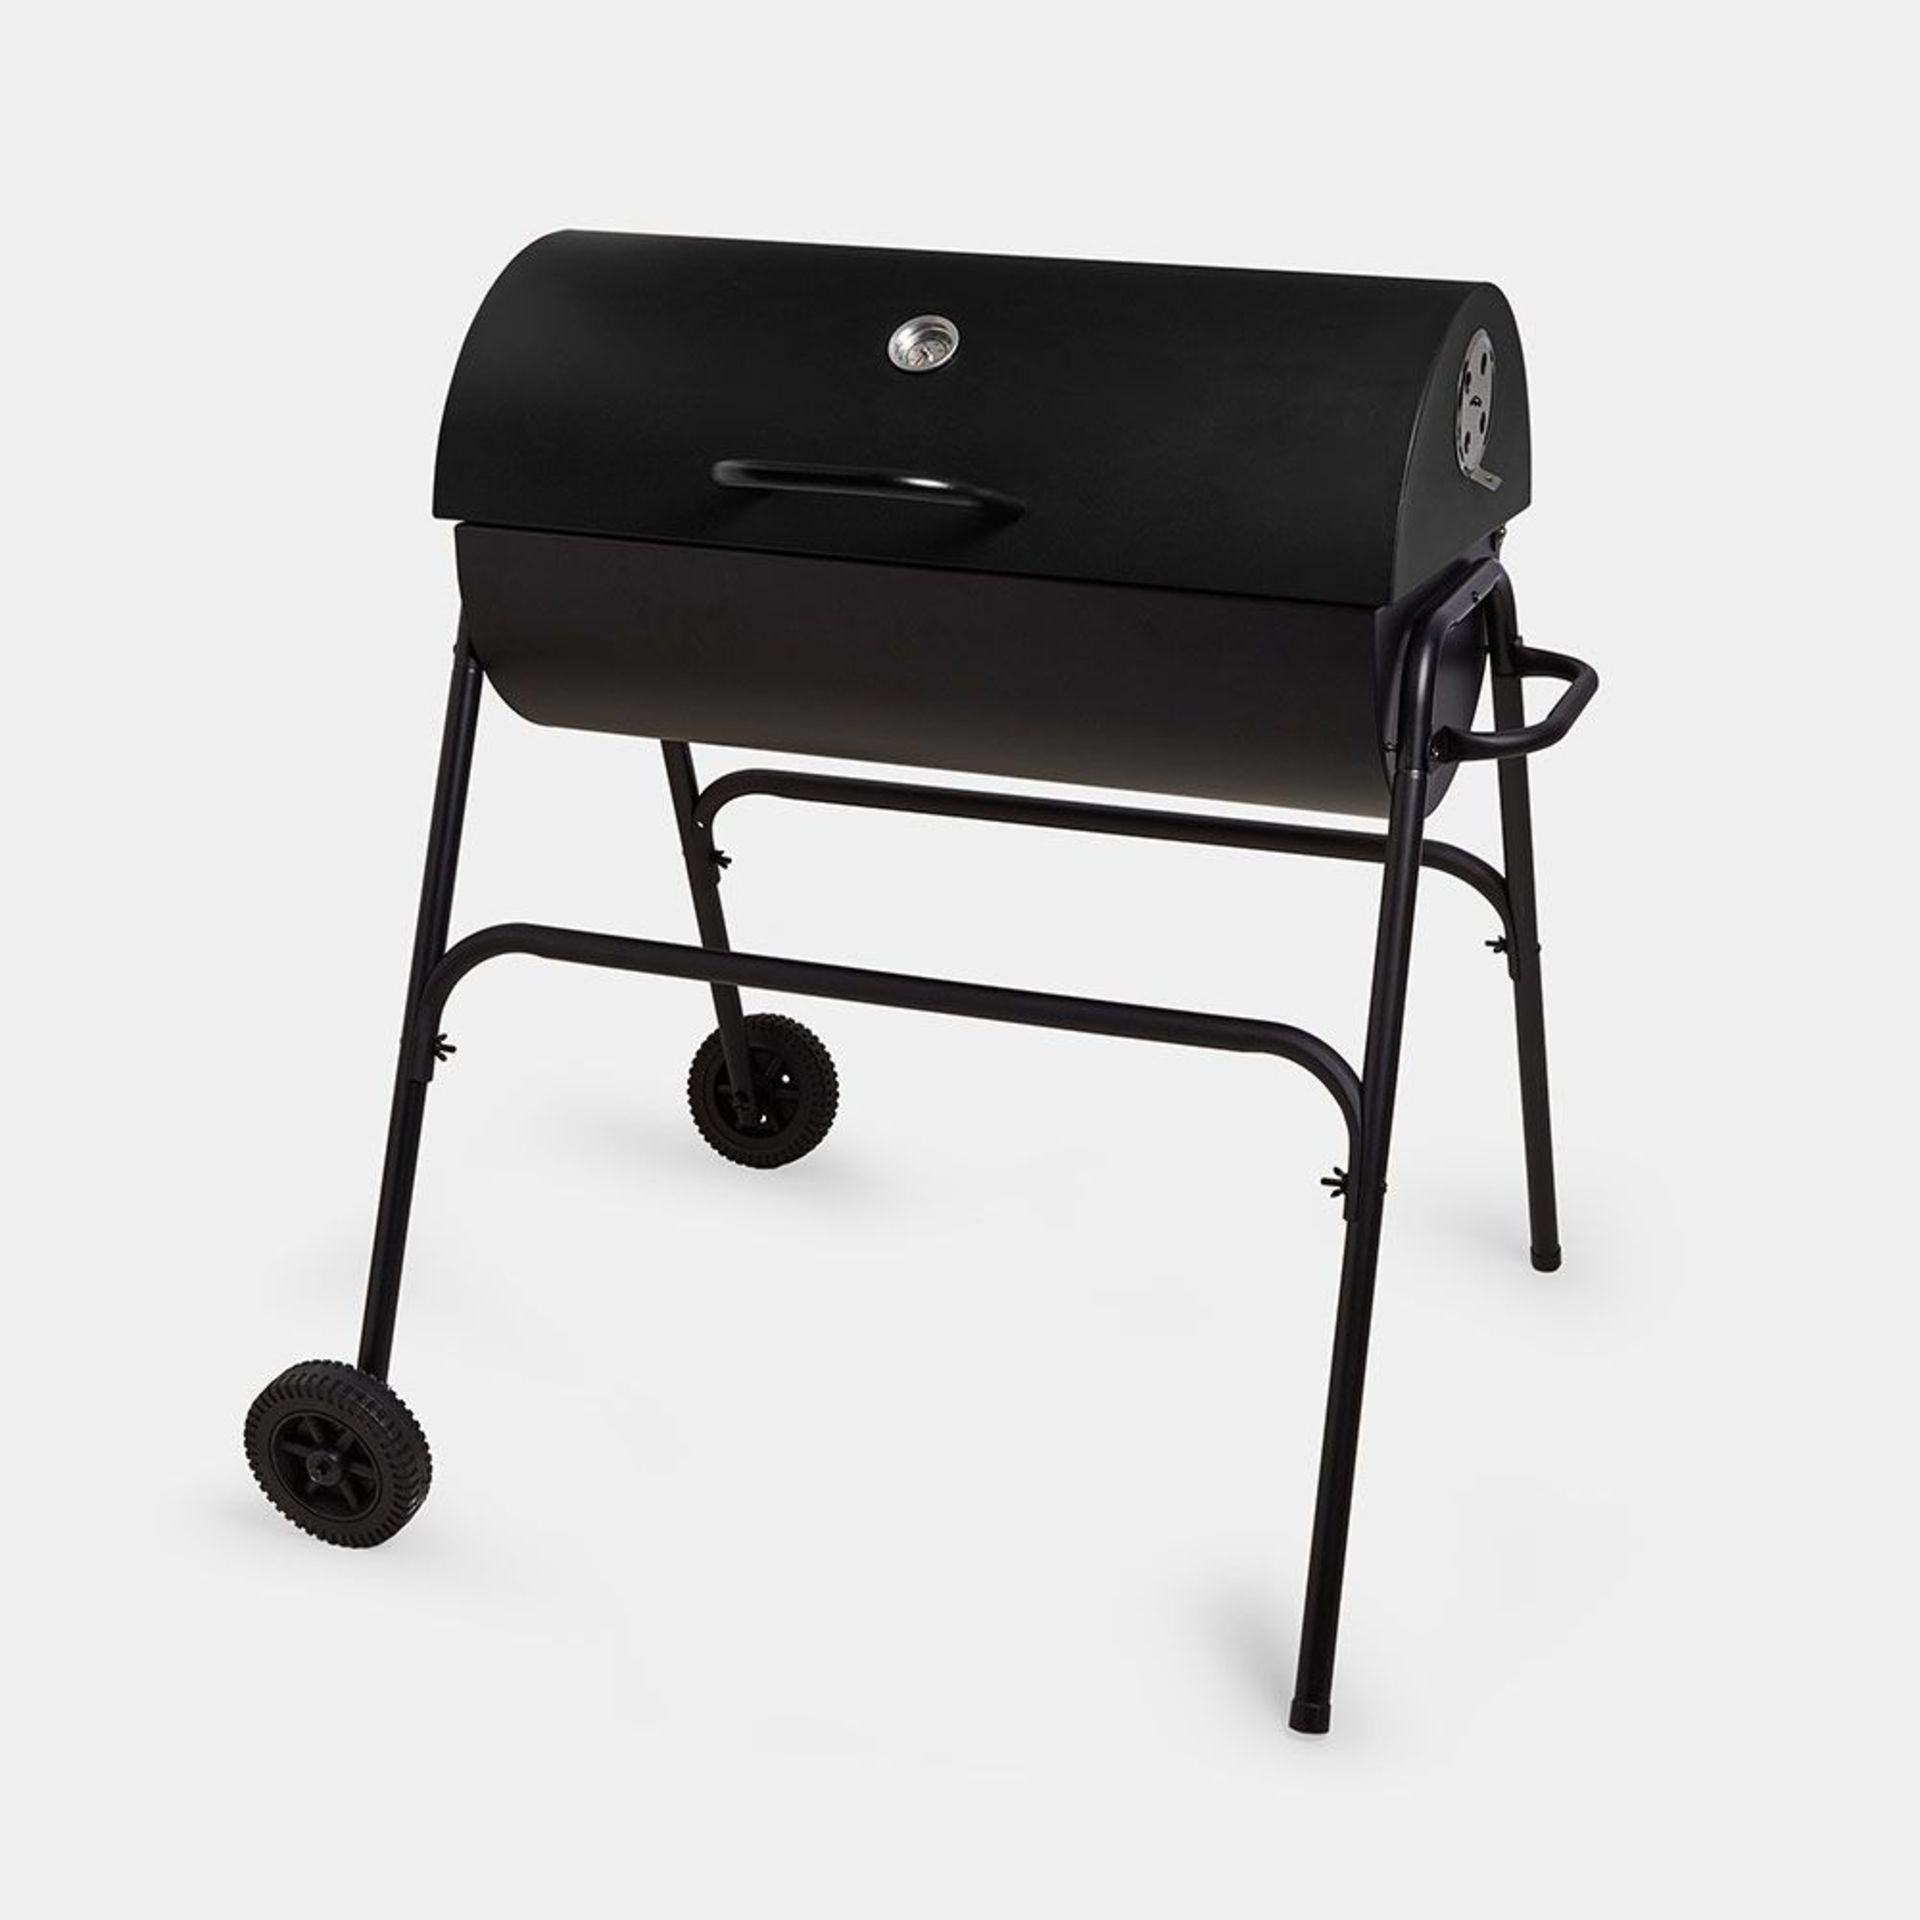 Barrel Charcoal BBQ. - R8. Get your summer off to a sizzling start with this charcoal barrel BBQ –